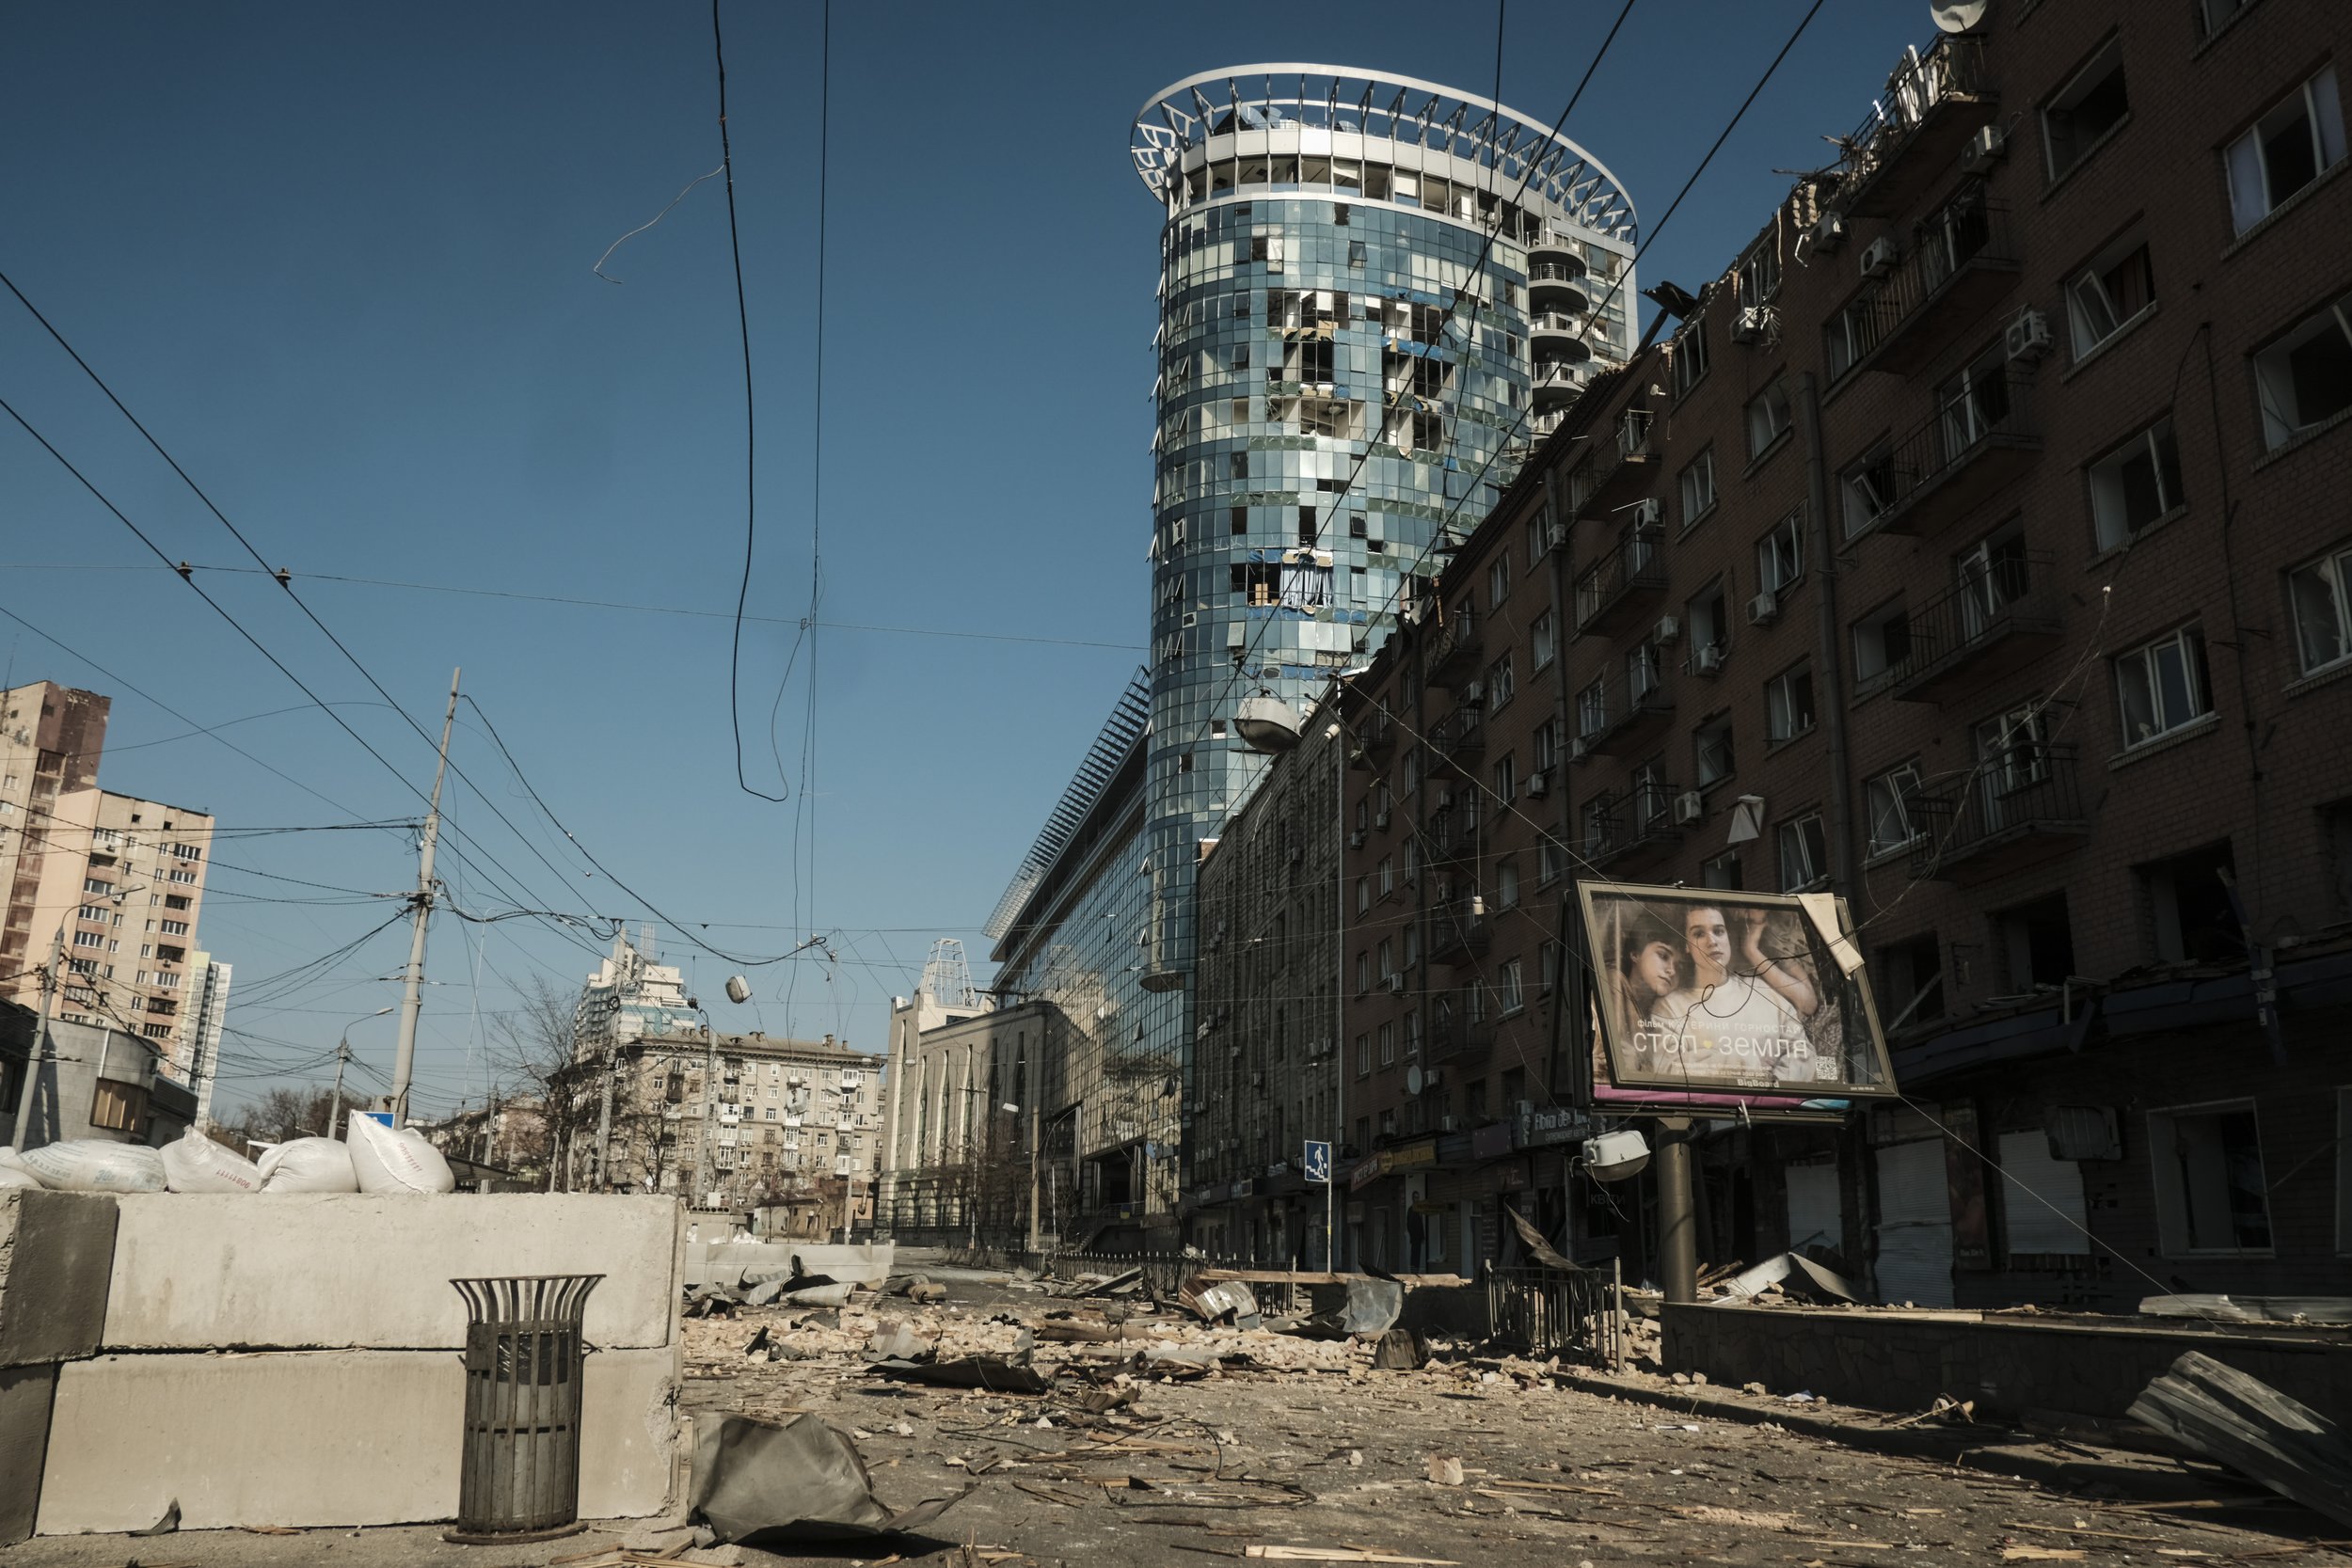  A street is littered with glass and debris following a Russian missile strike on a shopping district in Kyiv, Ukraine on March 15, 2022. Missile attacks on Kyiv claimed the lives of civilians and soldiers alike as Russia attempted to encircle the ci